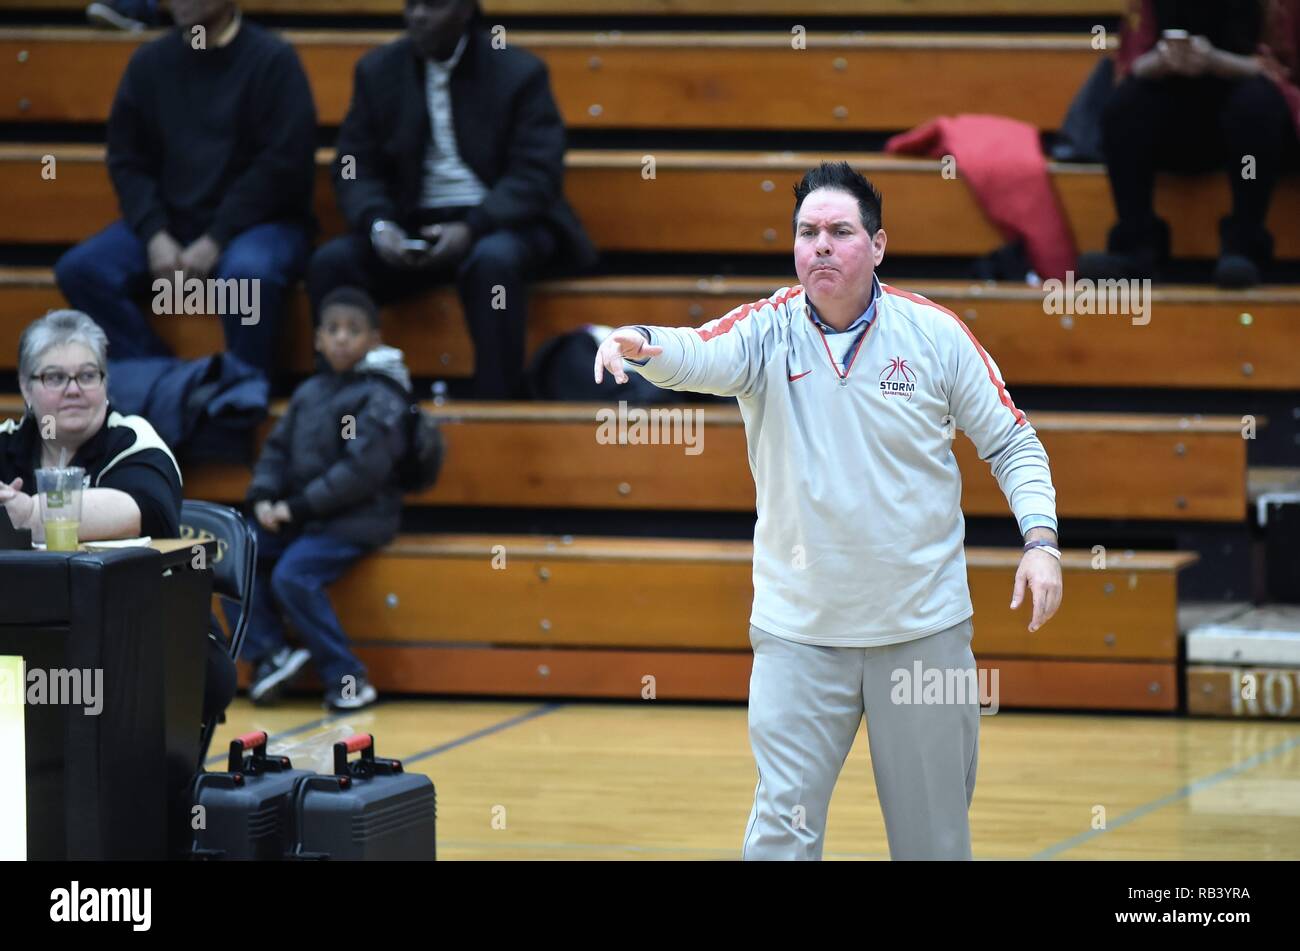 Streamwood, Illinois, USA. Coach reacting with disagreement to an official's call made on the floor. Stock Photo